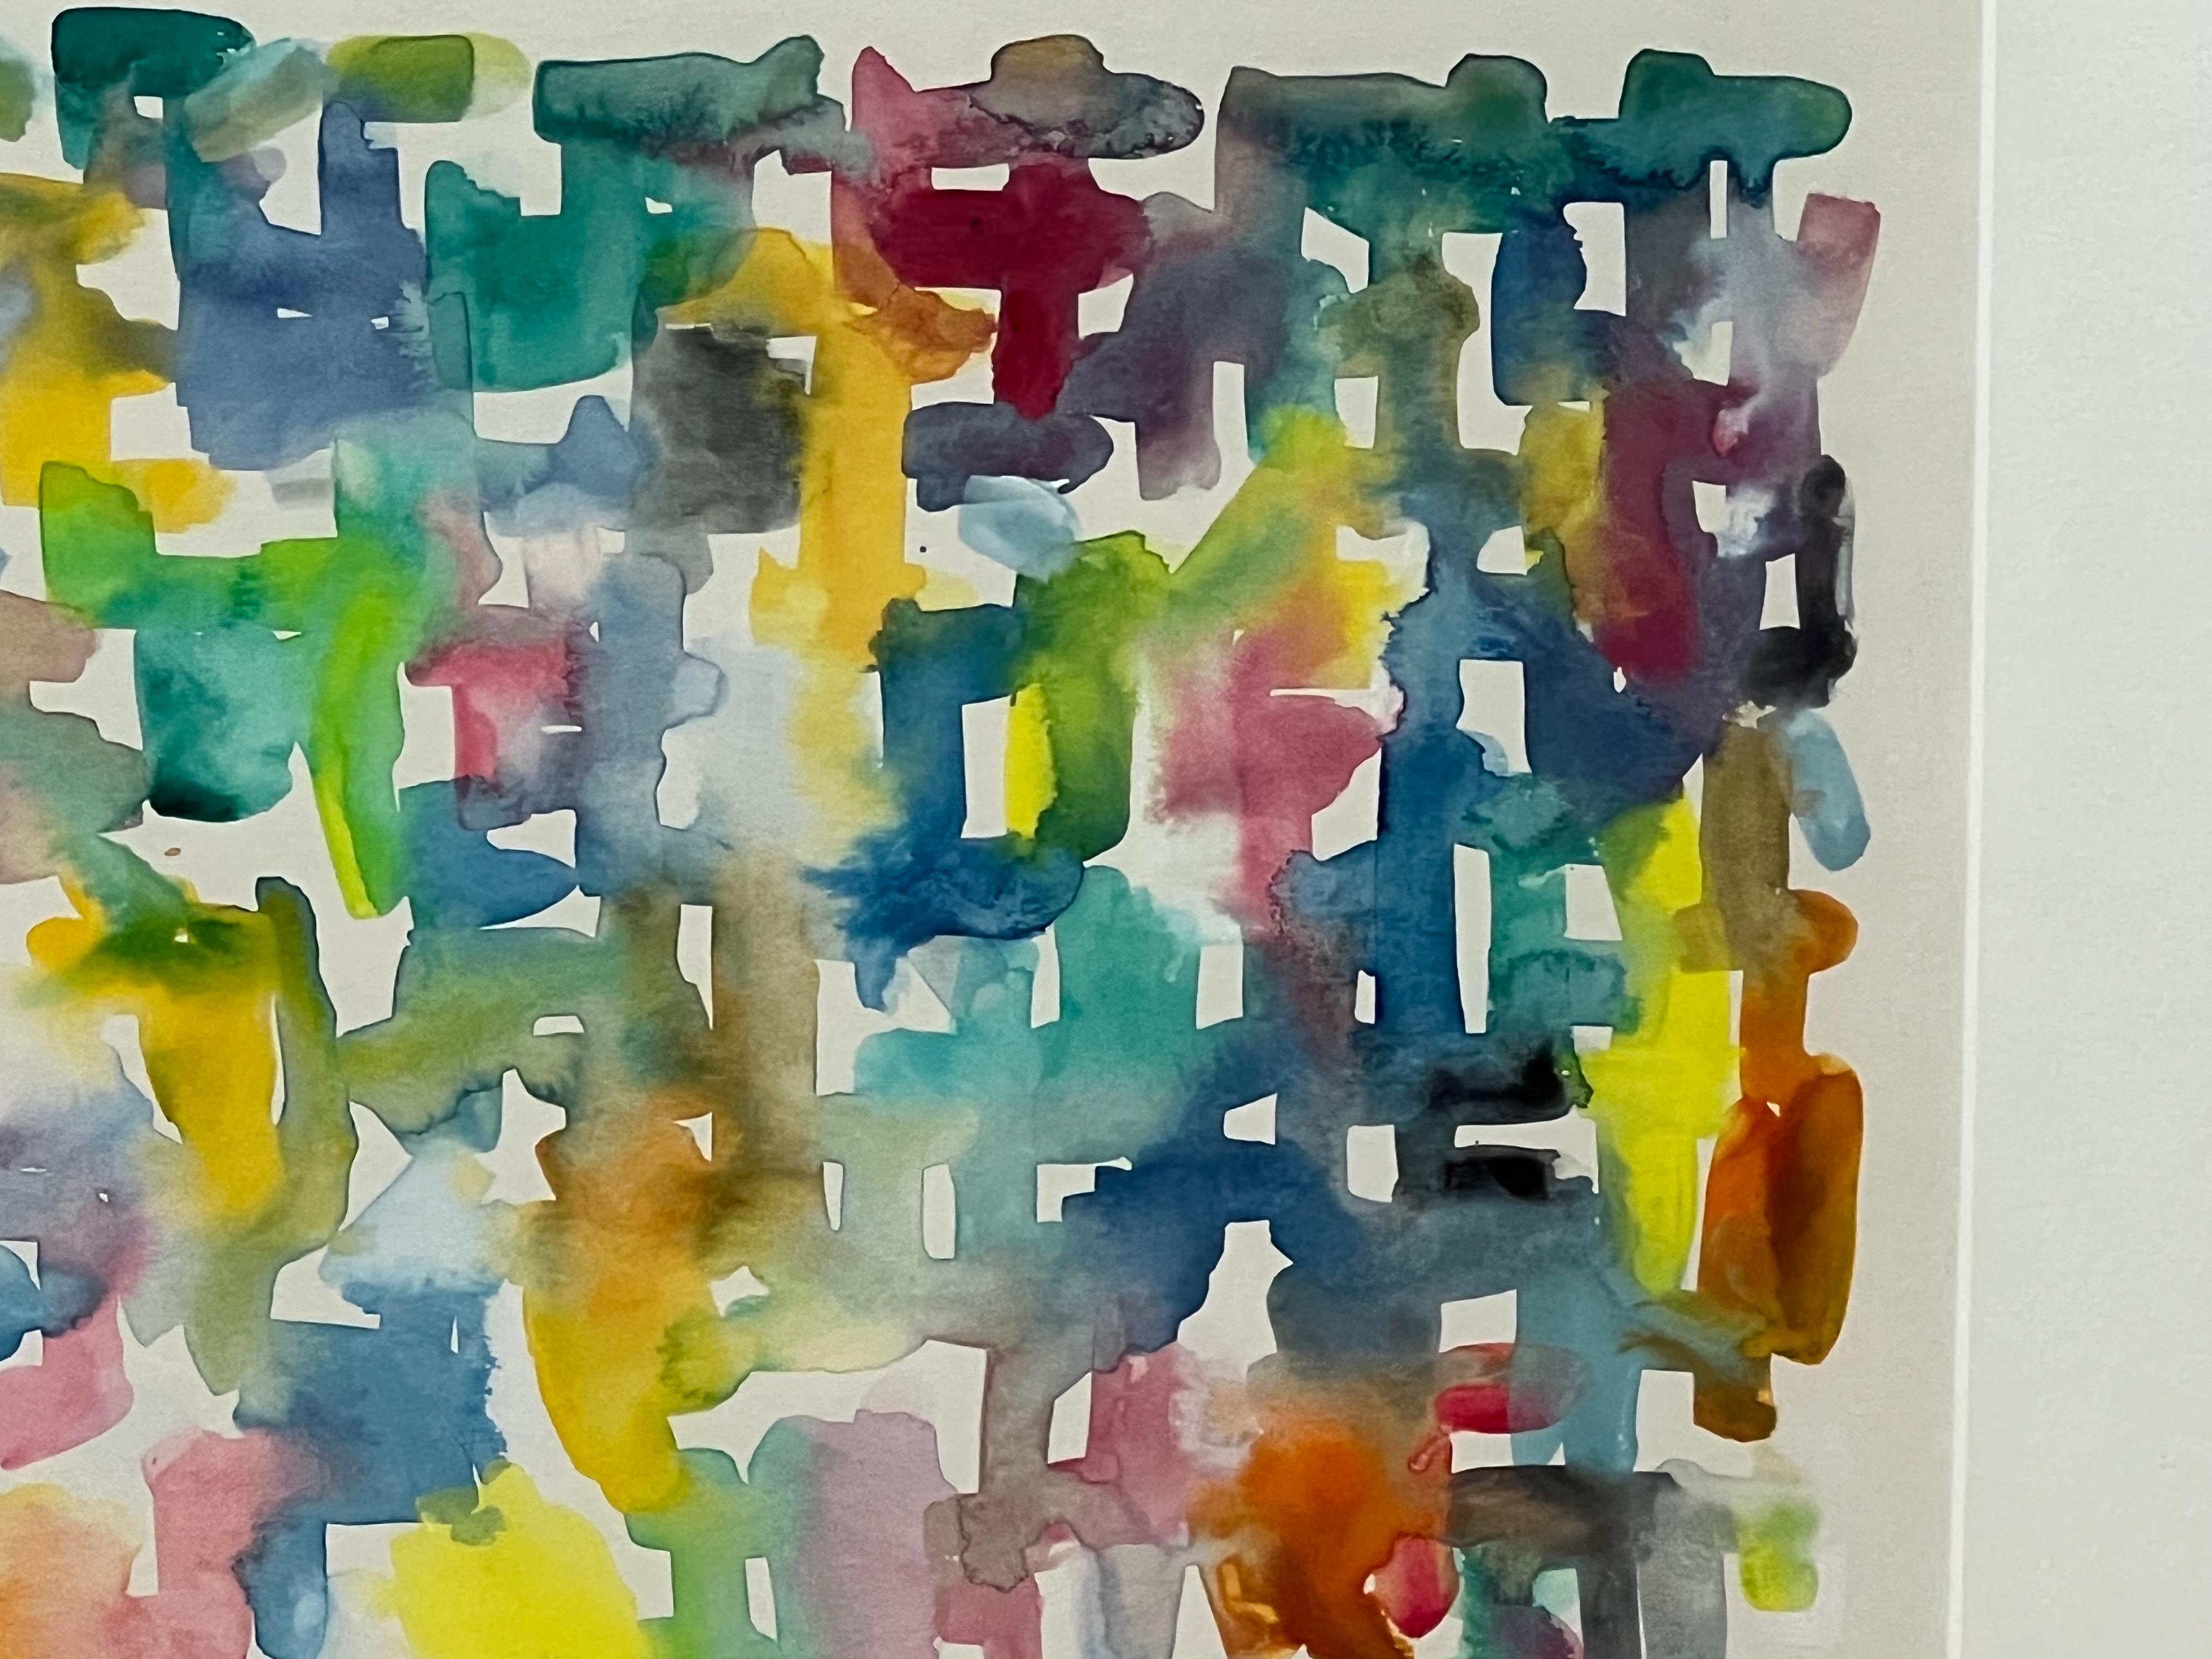 This abstract watercolor by Aubrey Penny features yellow, pink, blue, and navy thick paint lines intertwined in a beyond-comprehension way. The overall impression is peaceful and joyful thanks to the balanced combination of warm and cold tones. It